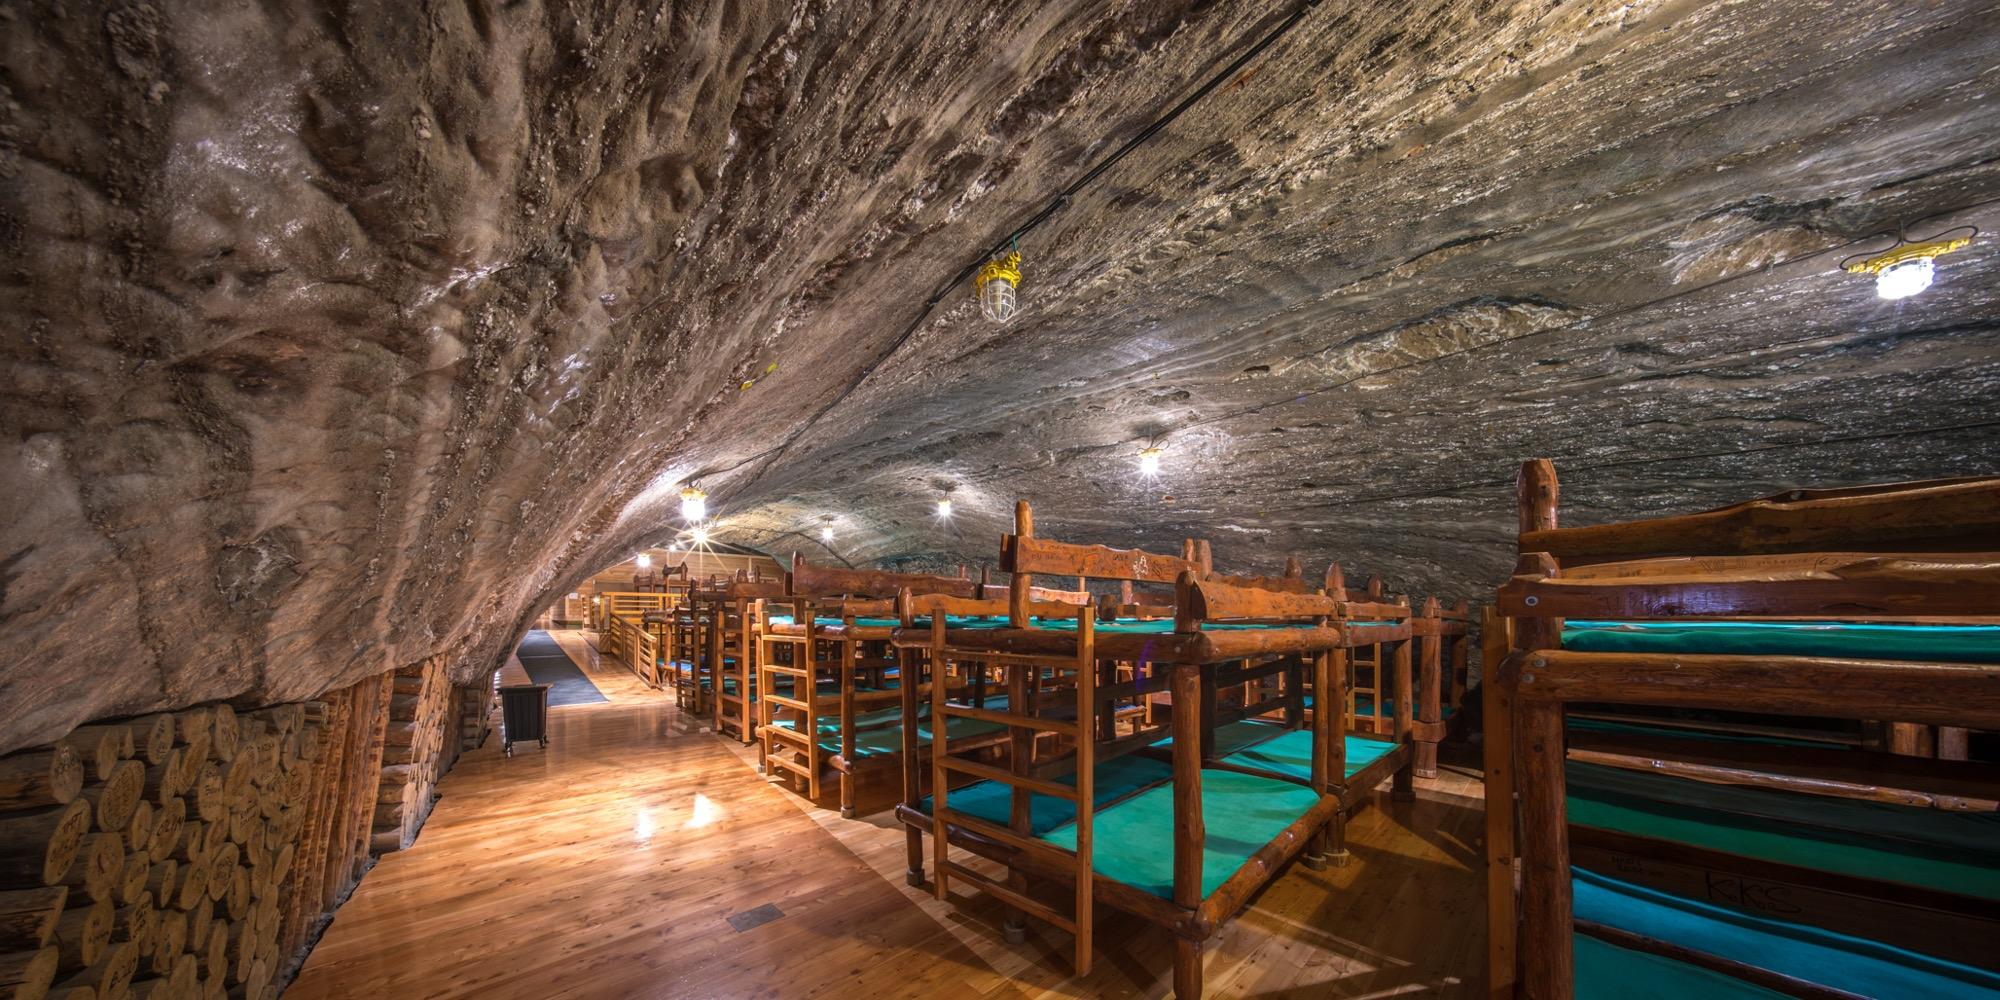 Overnight stays at Bochnia Salt Mine take place in the largest of the chambers, the Ważyn—located 250 meters underground—with 232 beds, a restaurant, and recreational facilities including a sports field, a playground, and a conference room. – © Adam Brzoza